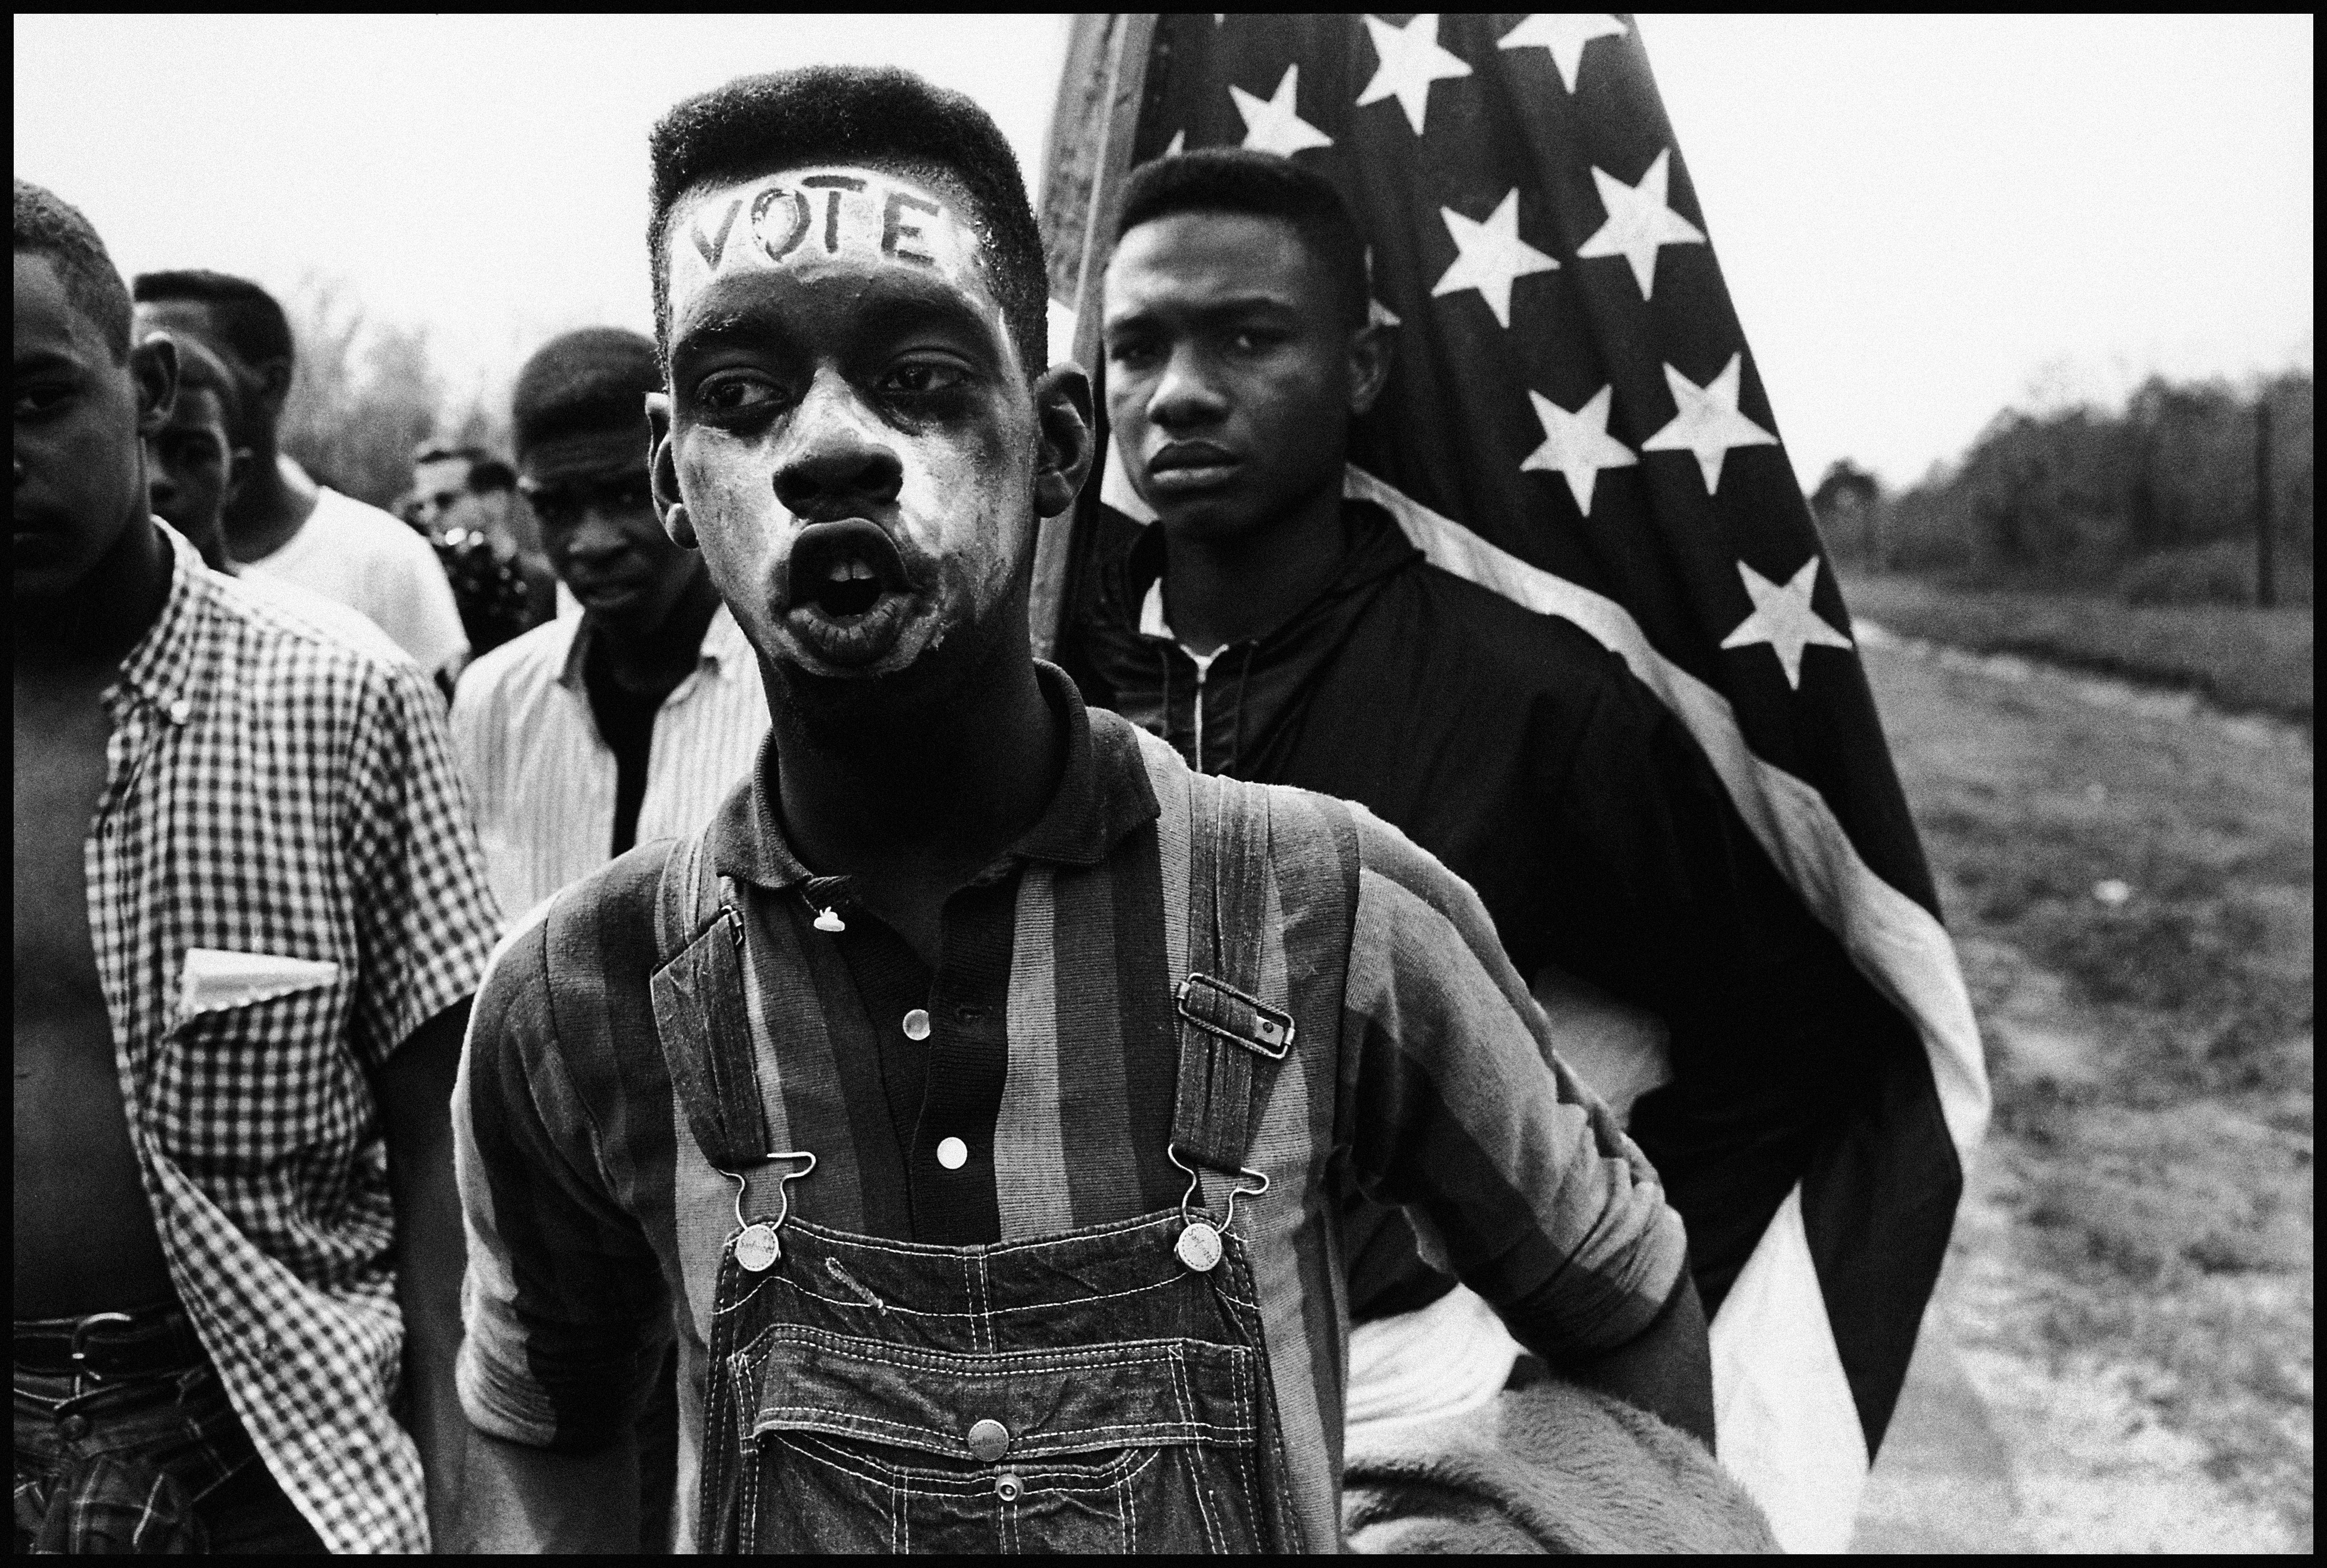 A civil rights demonstrator participates in the Selma to Mongtomery, Alabama march, led by Martin Luther King, Jr., in 1965.